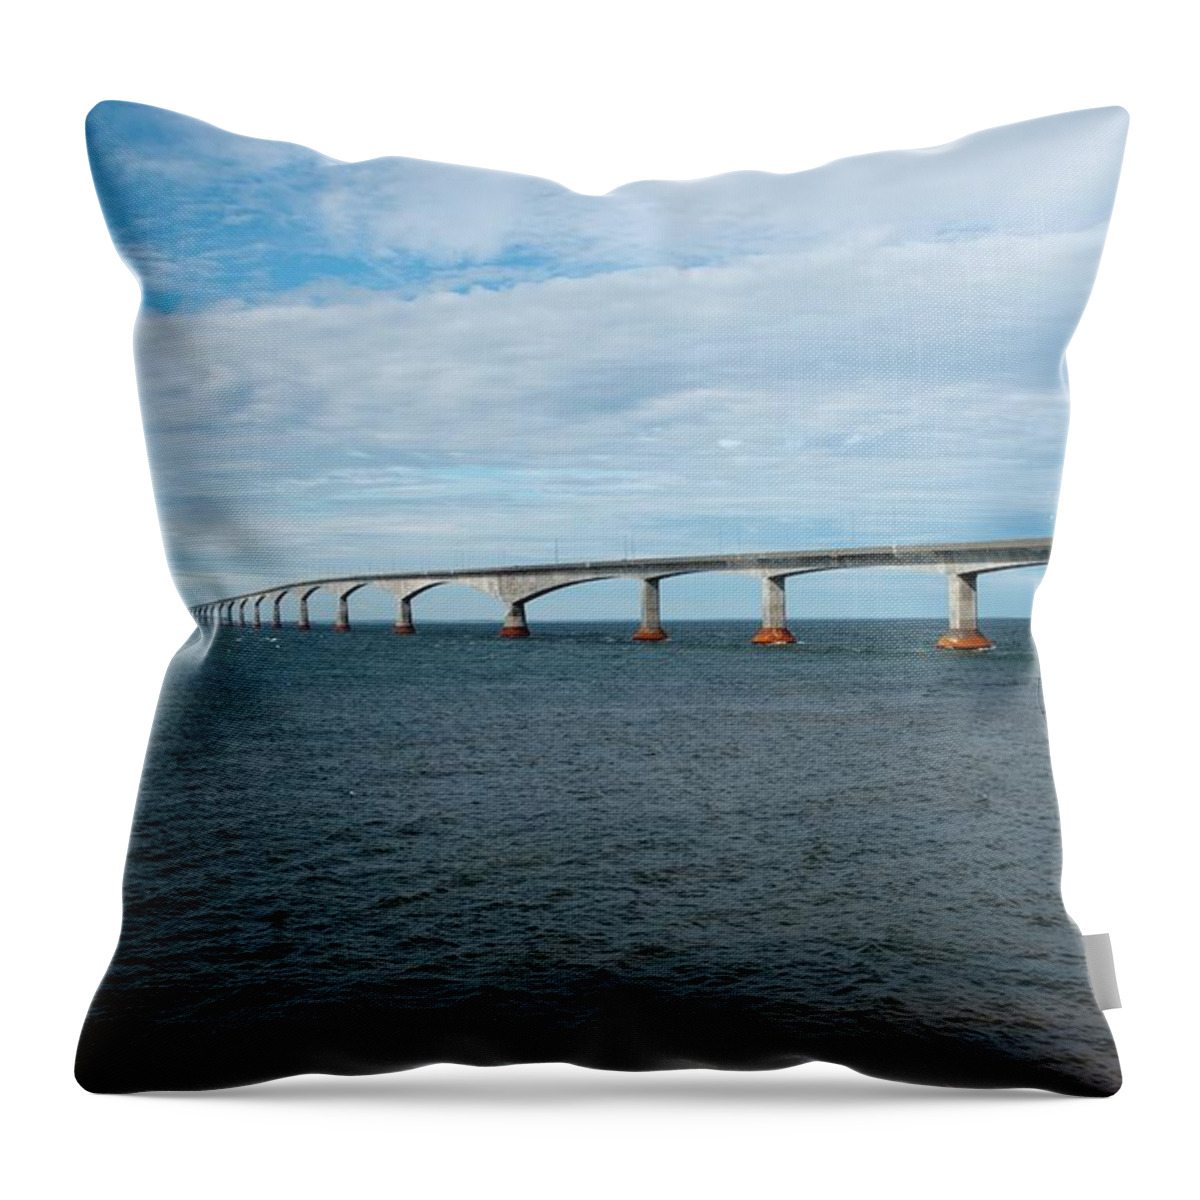 Water's Edge Throw Pillow featuring the photograph Canada by Design Pics / Guy Heitmann